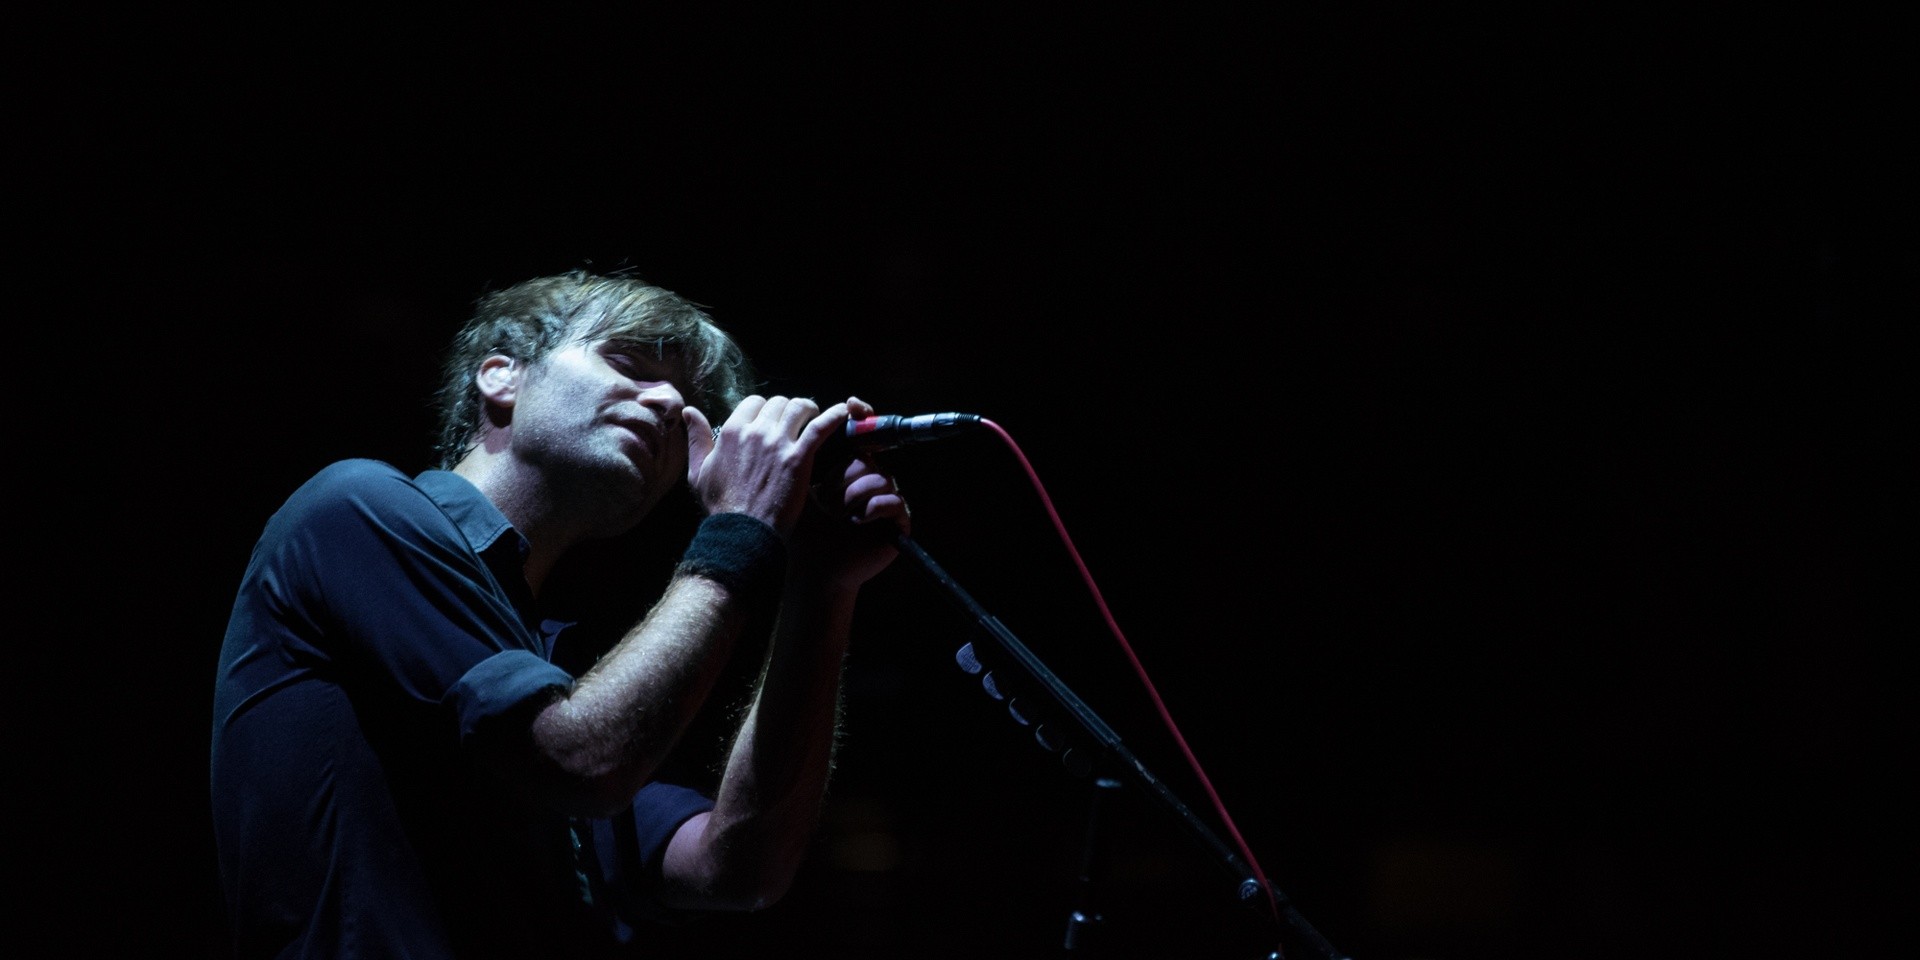 GIG REPORT: Death Cab For Cutie continues to imbue hearts and conjure tears